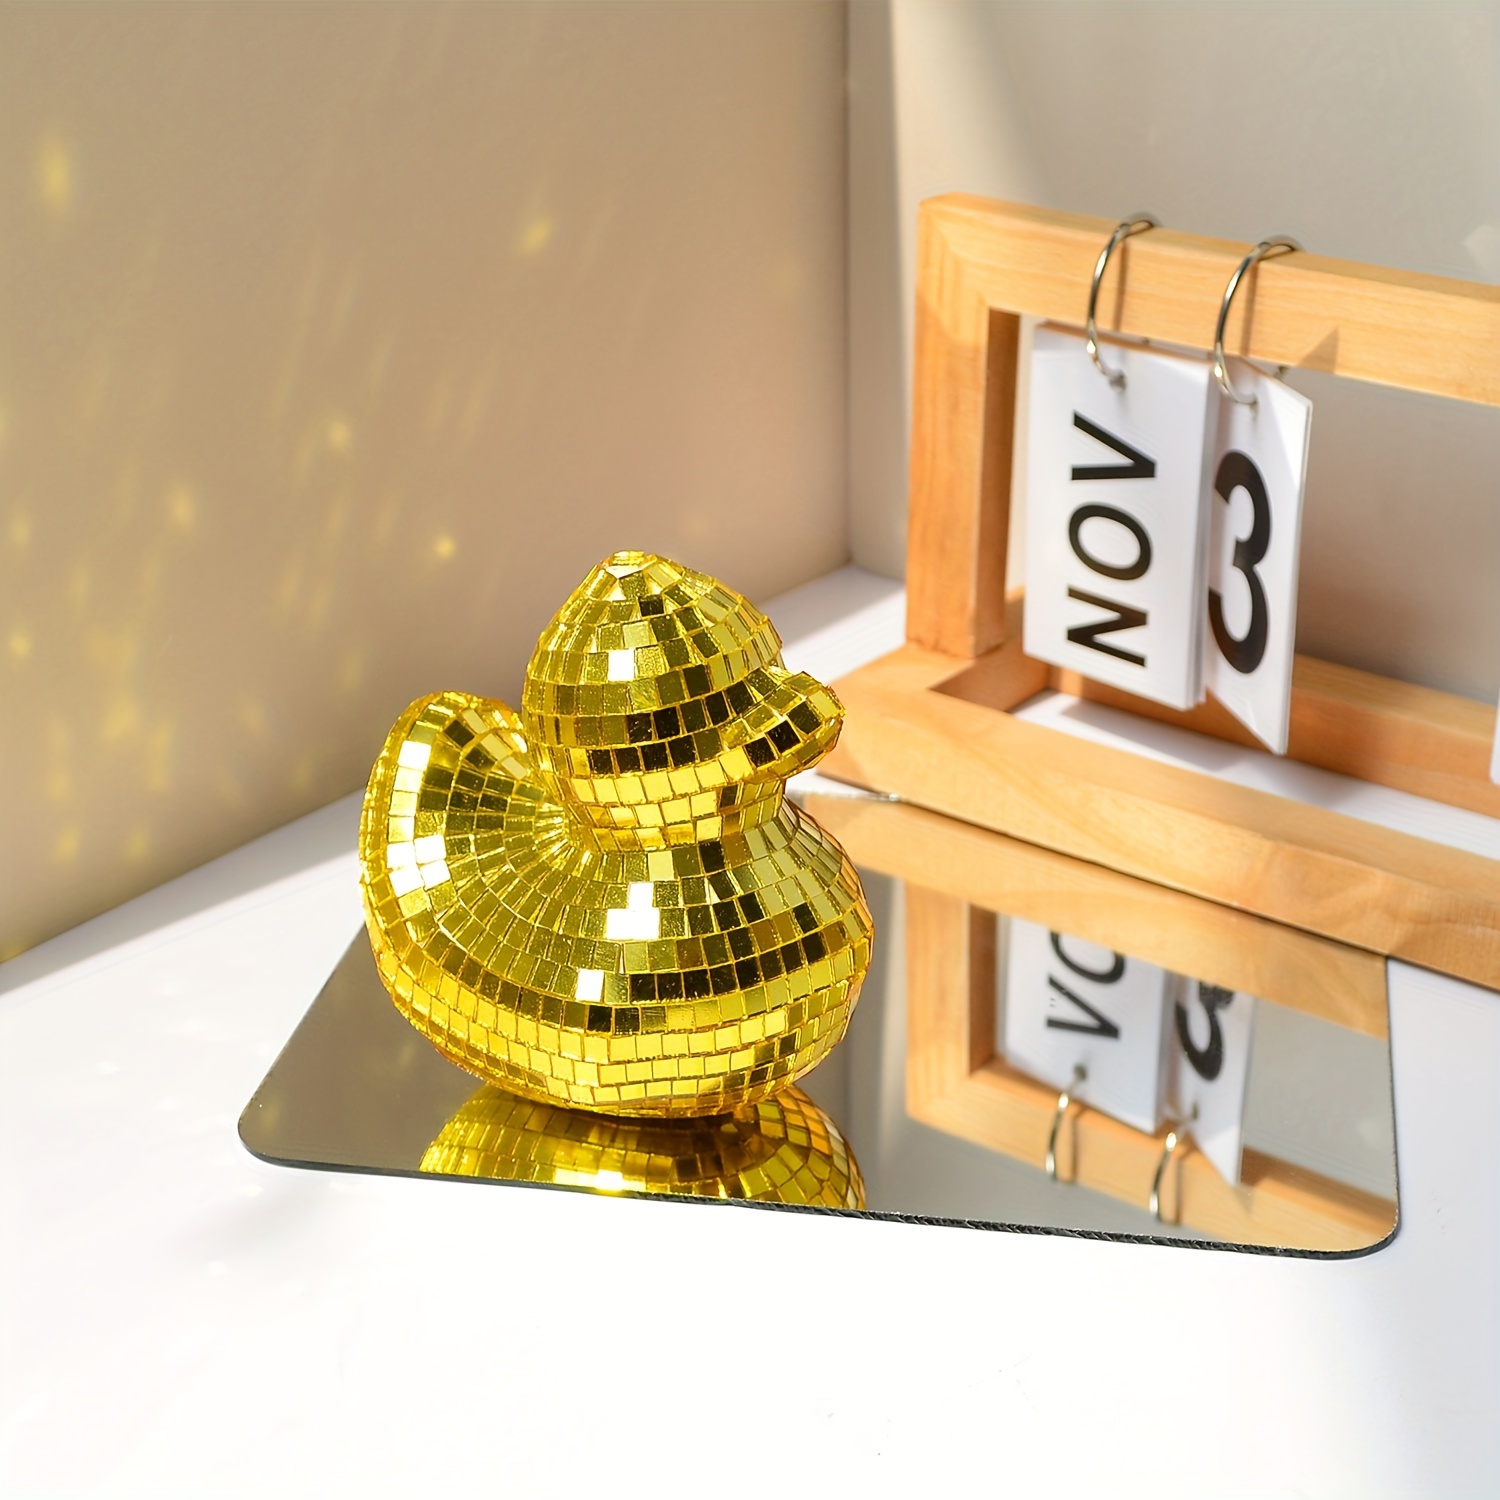 

Disco Mirror Duck Decoration - Ideal For Home, Tabletop Display, And As A Gift For Arts & Crafts Enthusiasts, No Electricity Needed